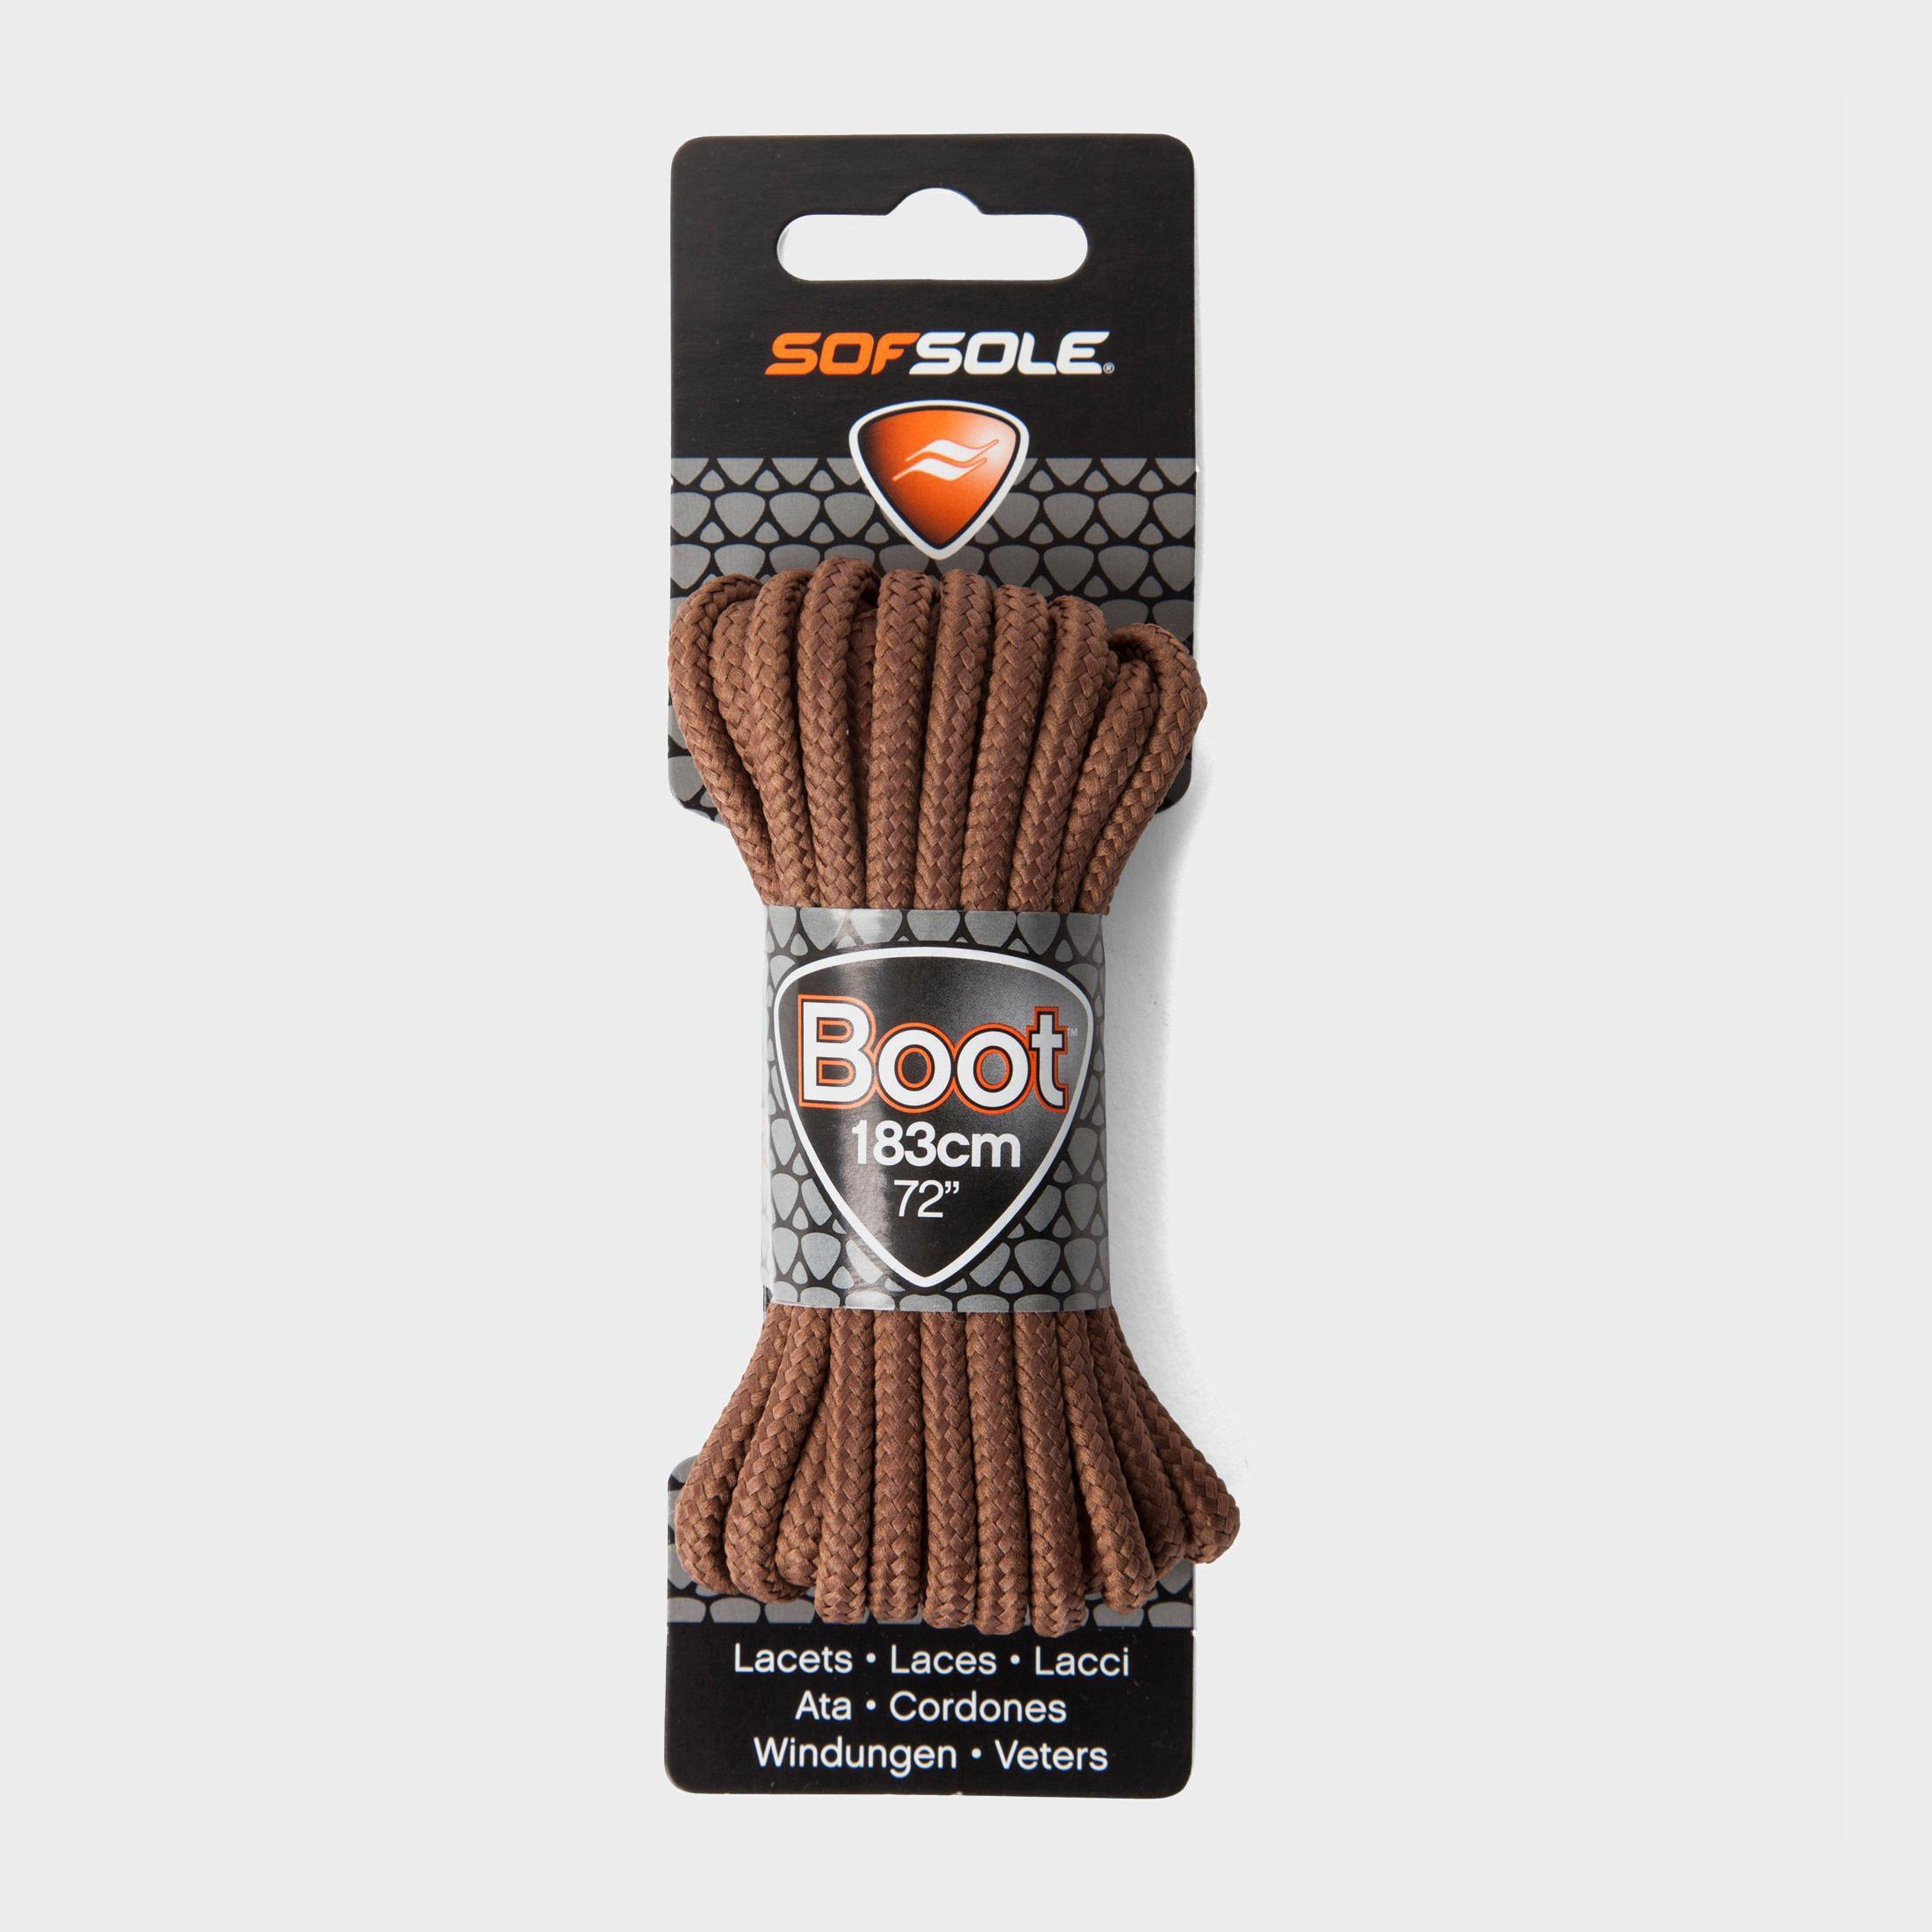 Sof Sole Wax Boot Laces - 183cm, Brown